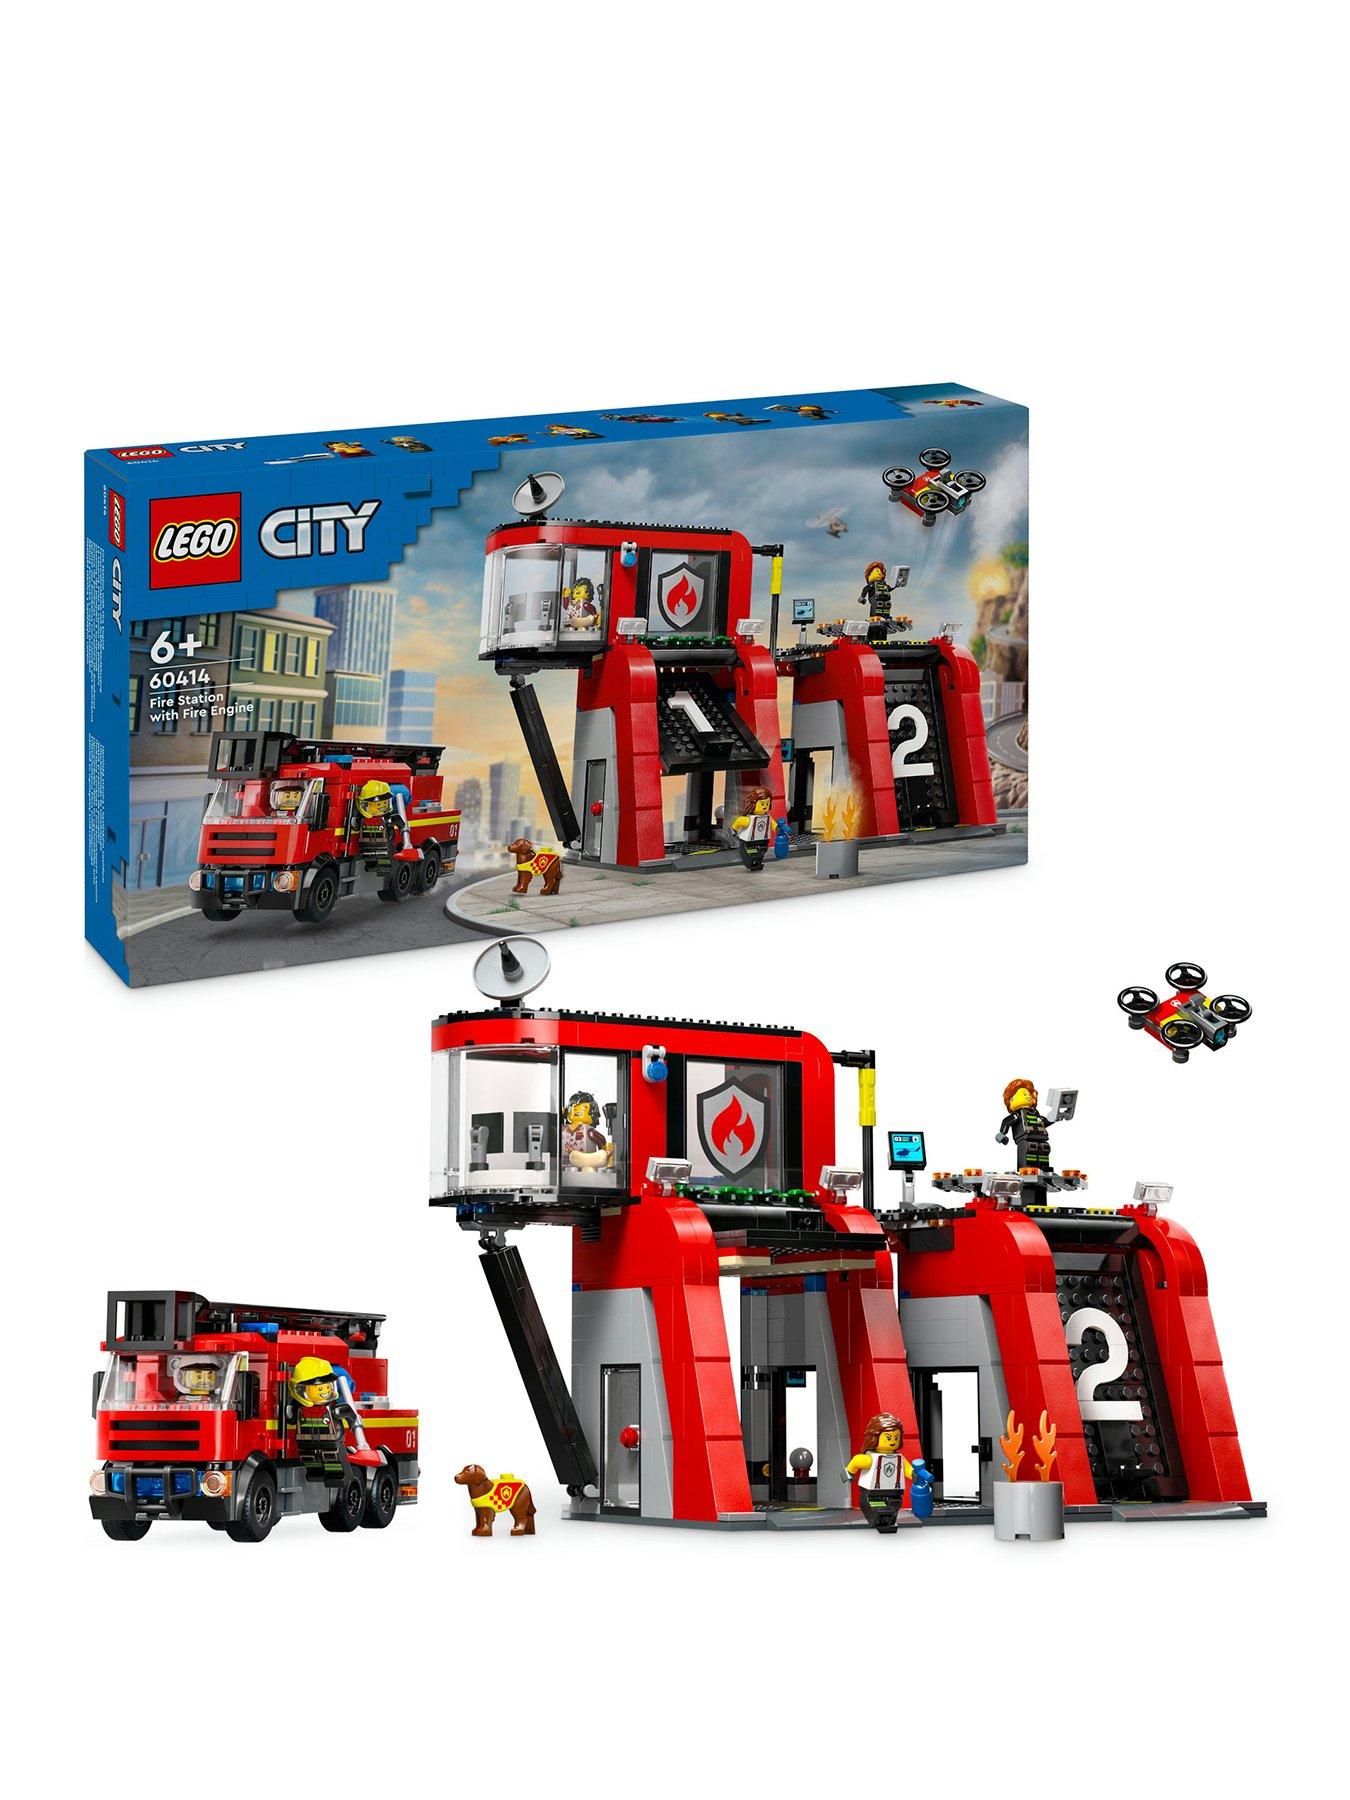 Lego City Fire Station With Fire Engine Playset 60414